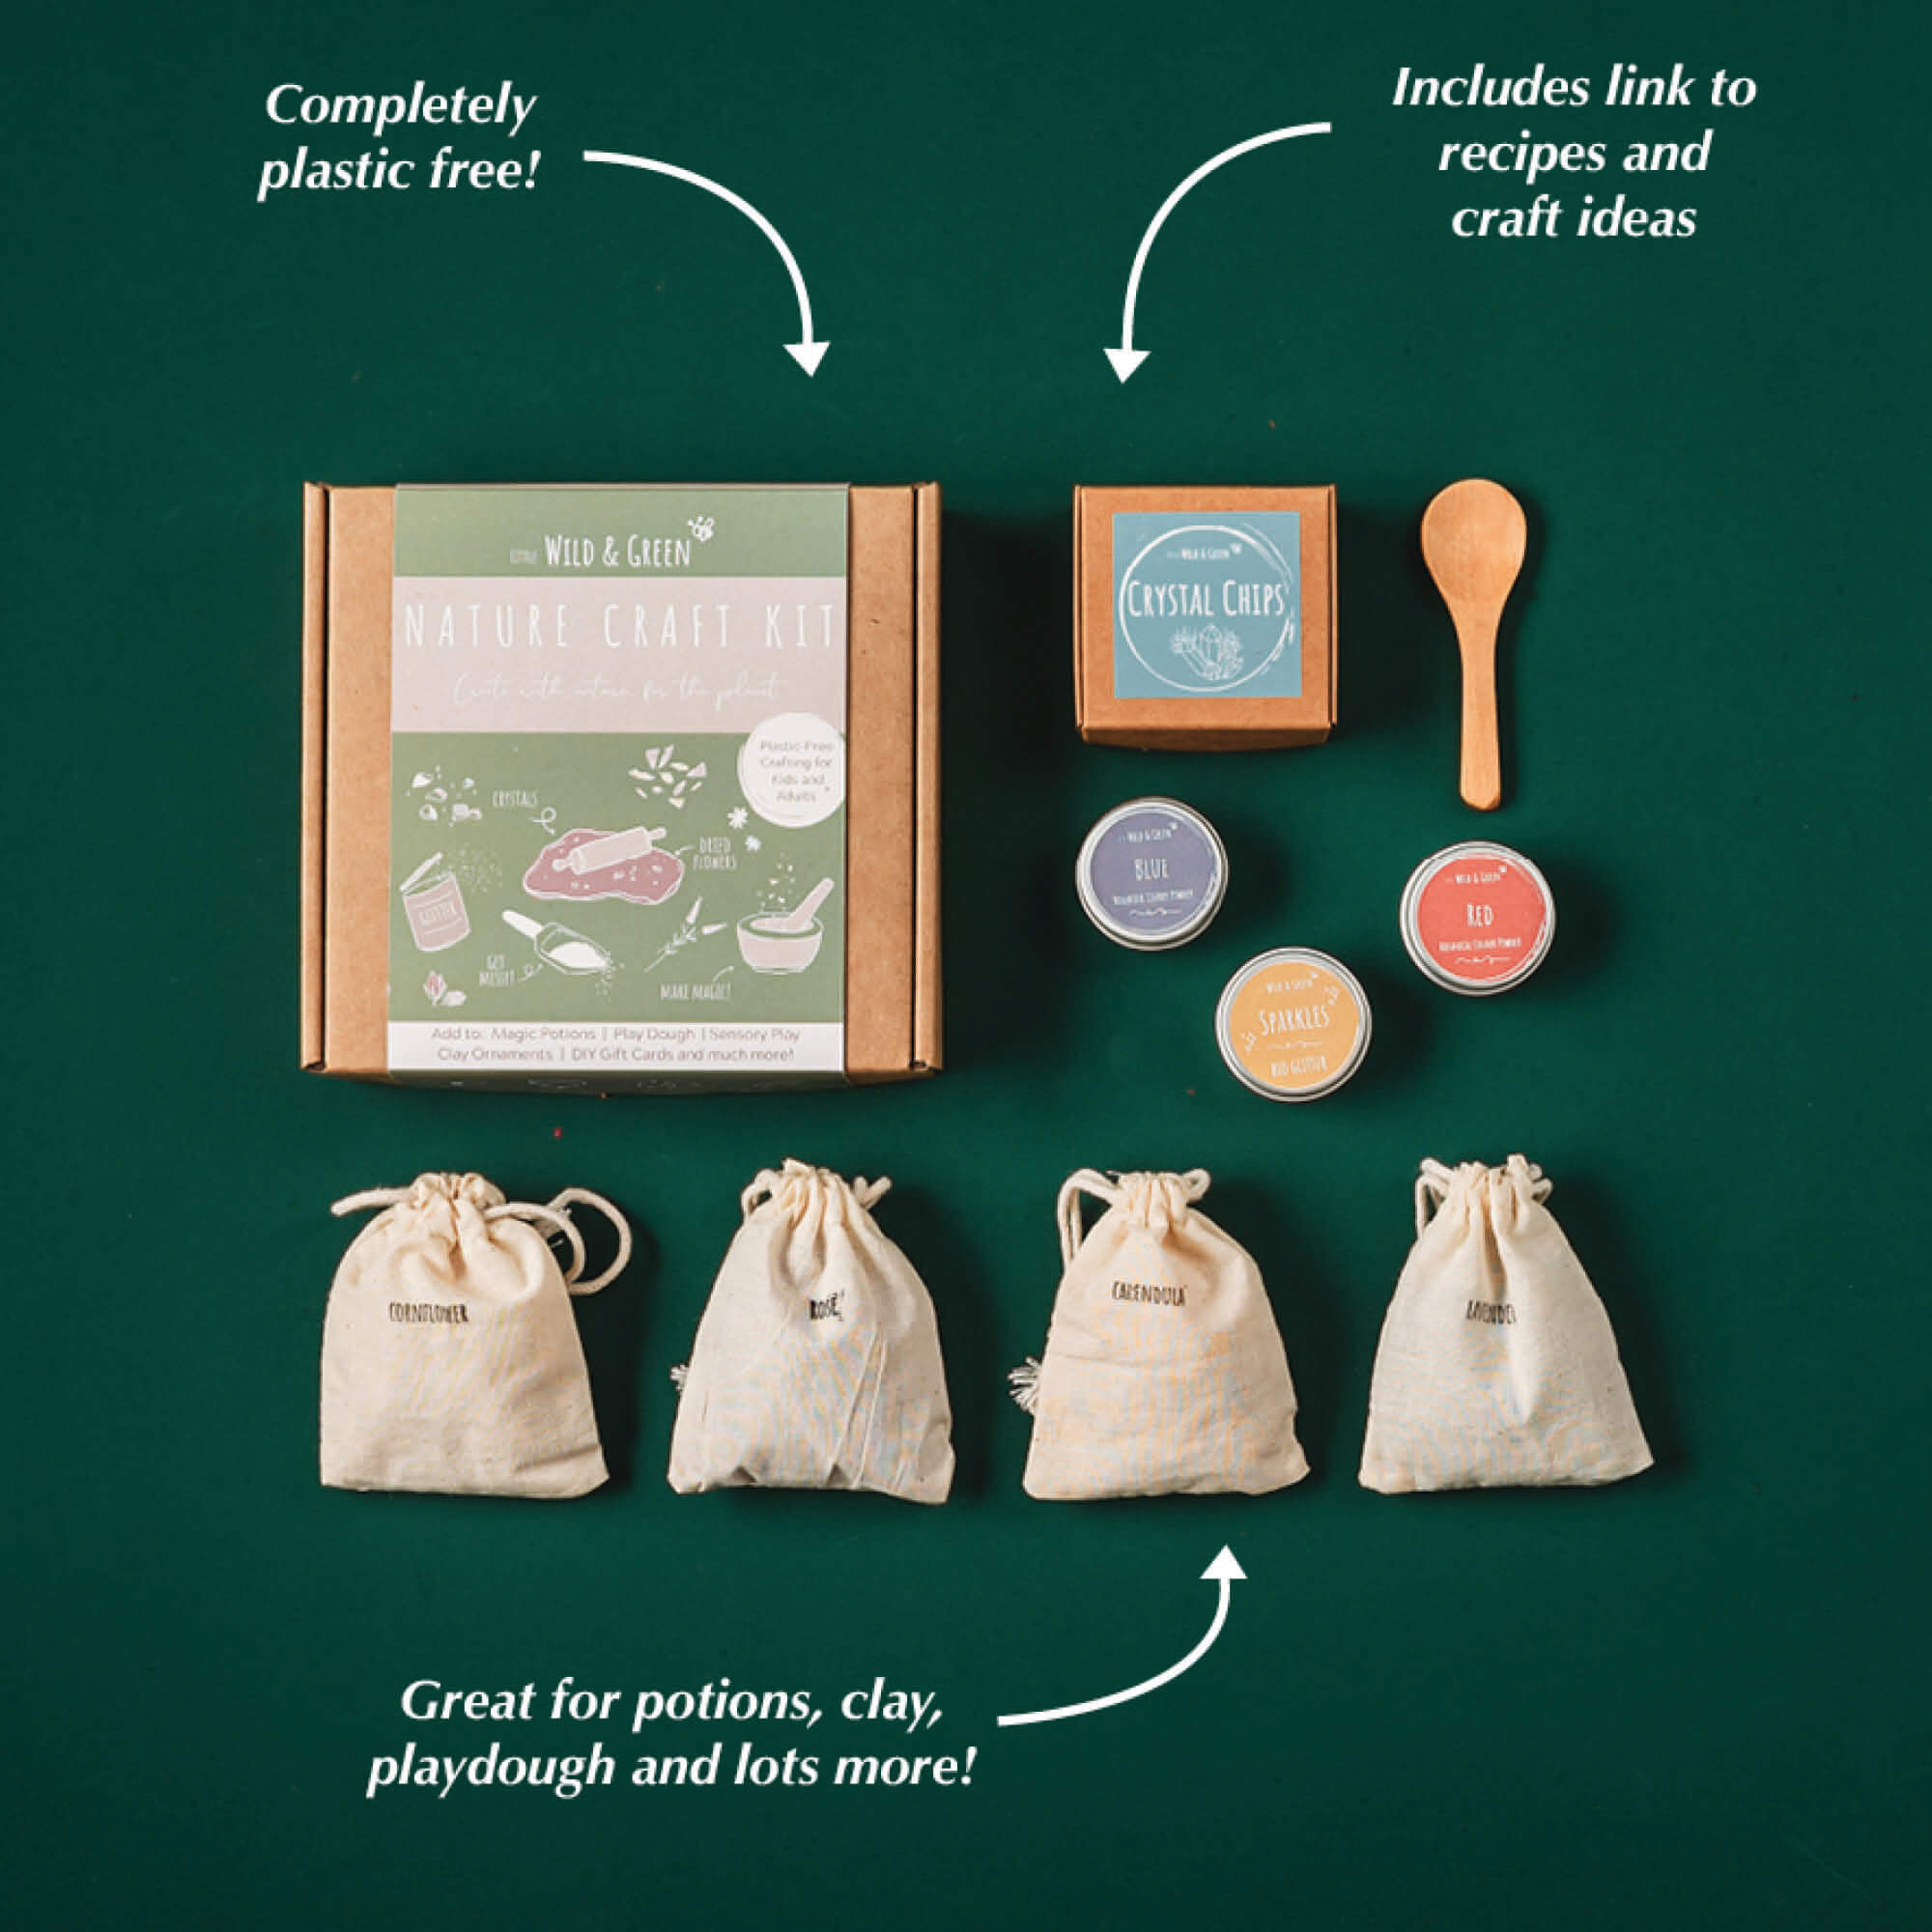 Nature craft kit by Little Wild and Green made with all natural materials including 4 bags of petals, 2 paint powders, 1 eco glitter, a box of crystal chips and a wooden spoon. perfect for nature crafting for kids including playdough, clay and magic potions from Your Wild Books